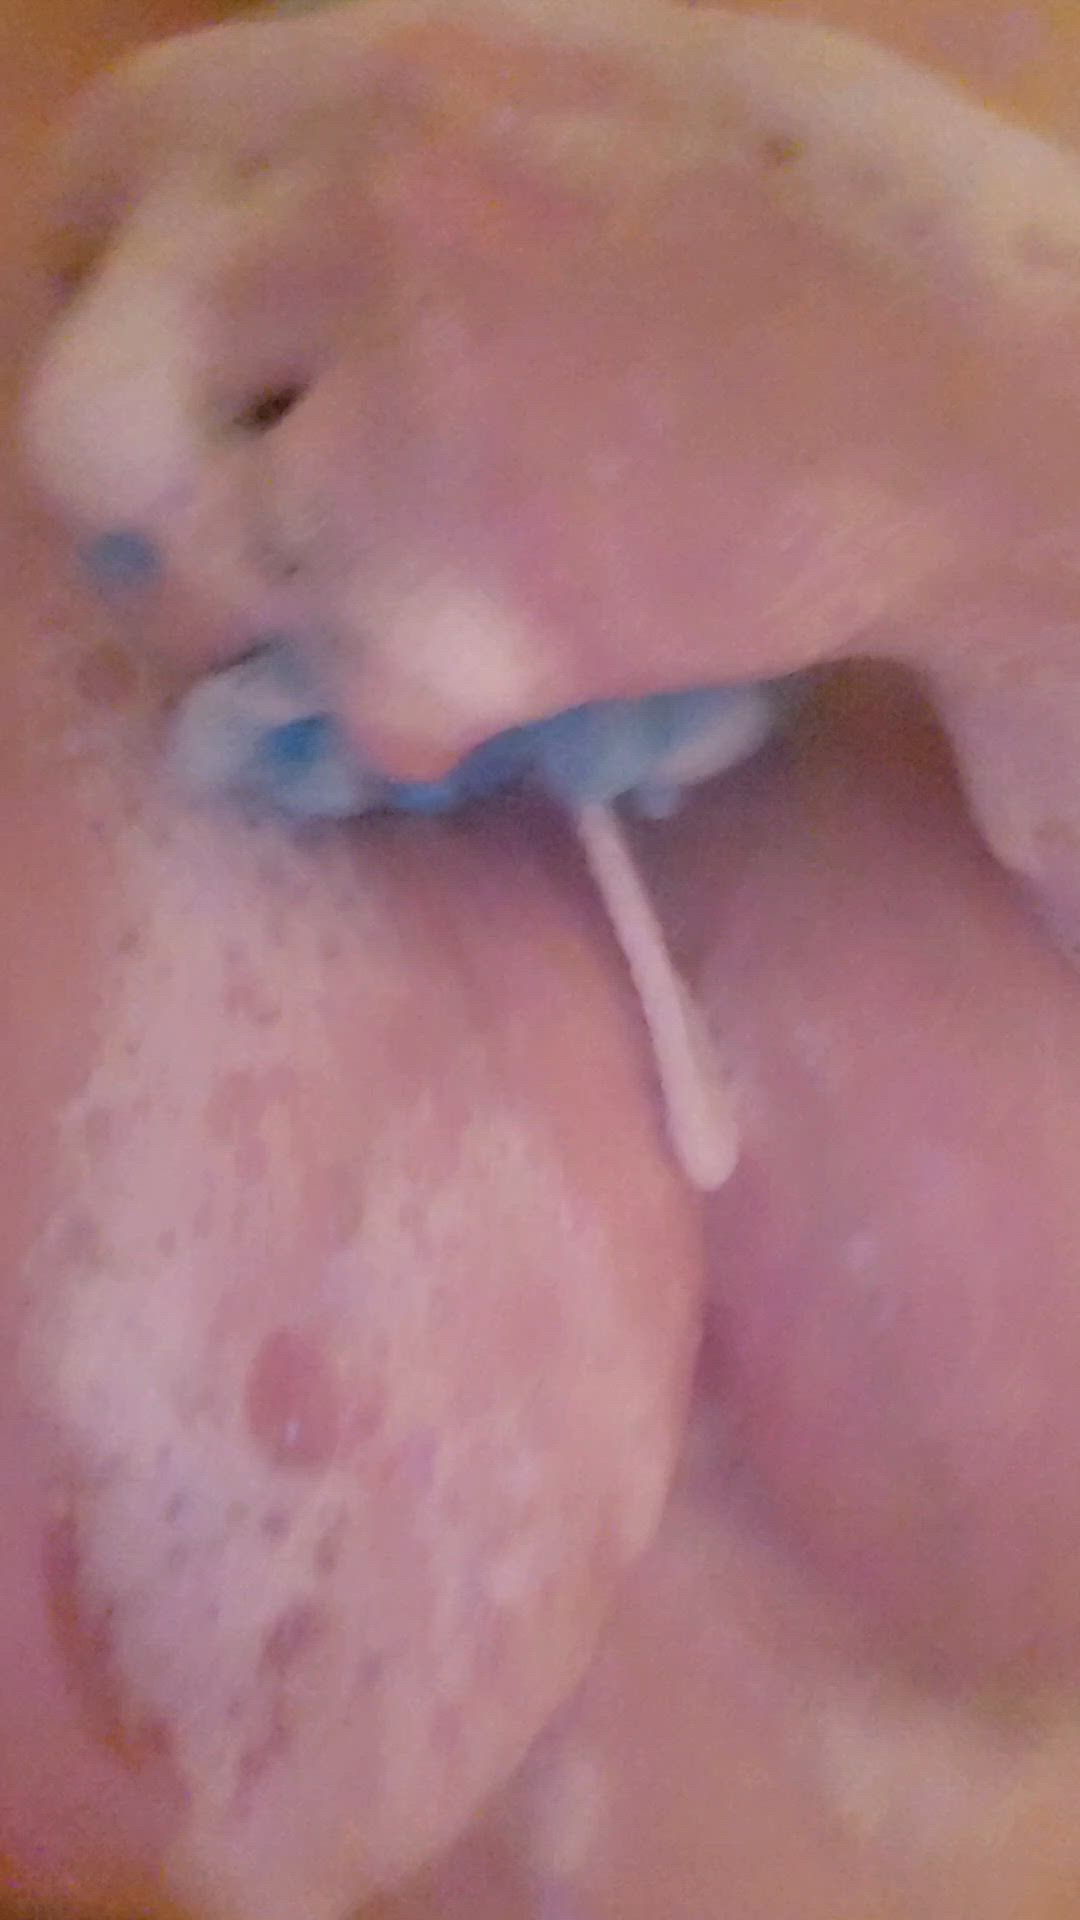 Tits porn video with onlyfans model hotwifenicky <strong>@hotwife.nicole.and.dean</strong>